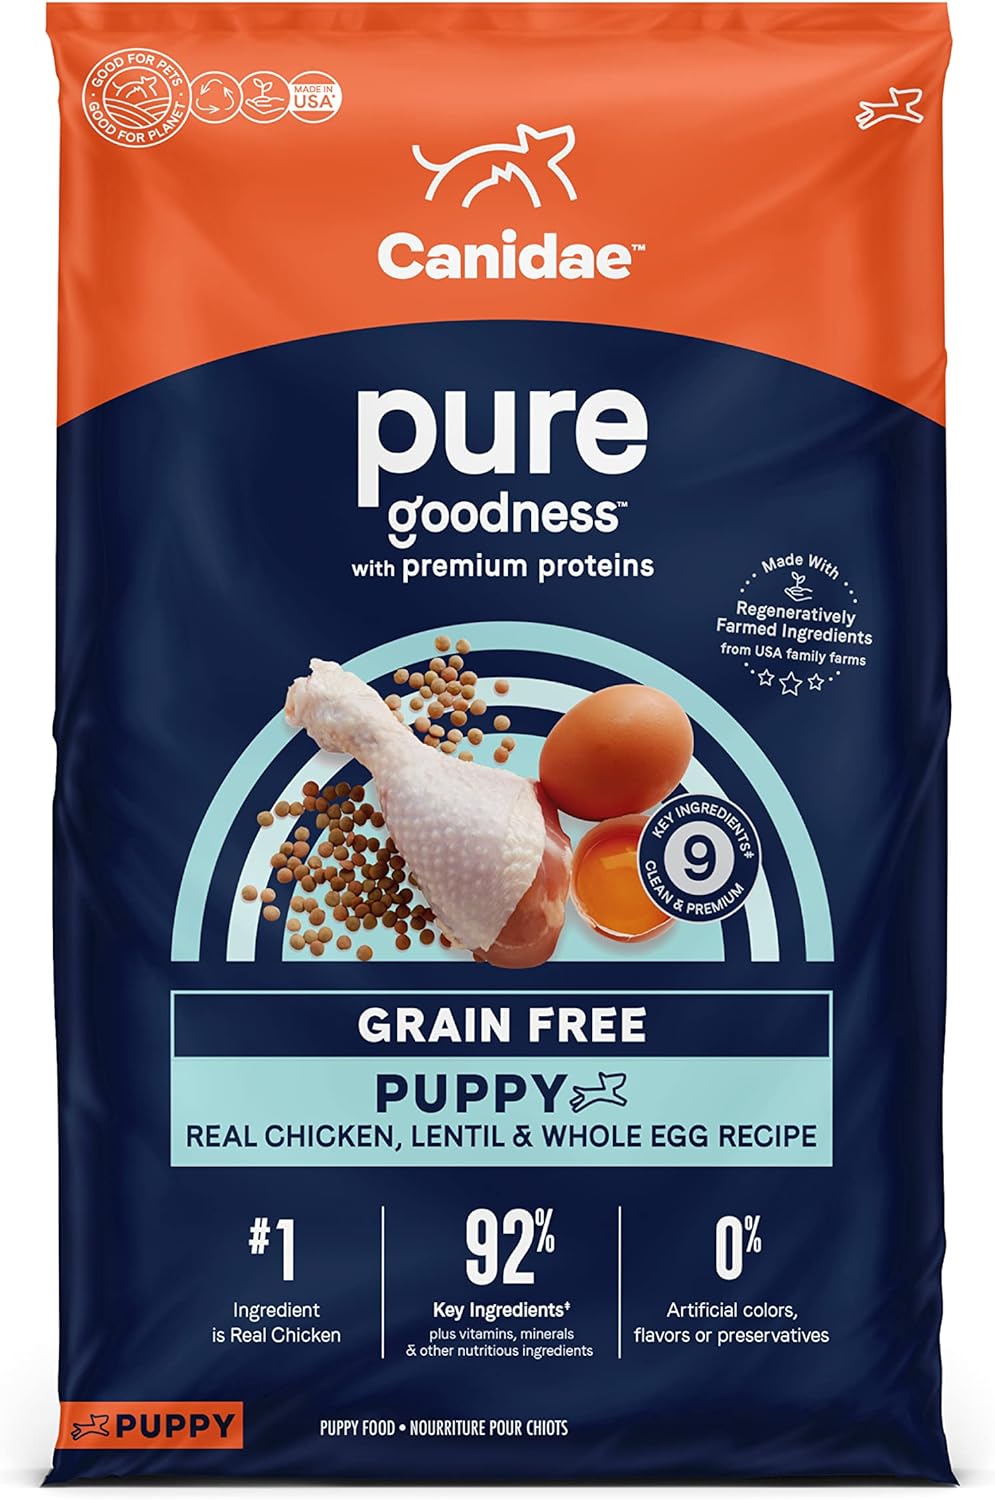 Canidae Pure Grain-Free Puppy Real Chicken, Lentil & Whole Egg Recipe Dry Dog Food – Gallery Image 1